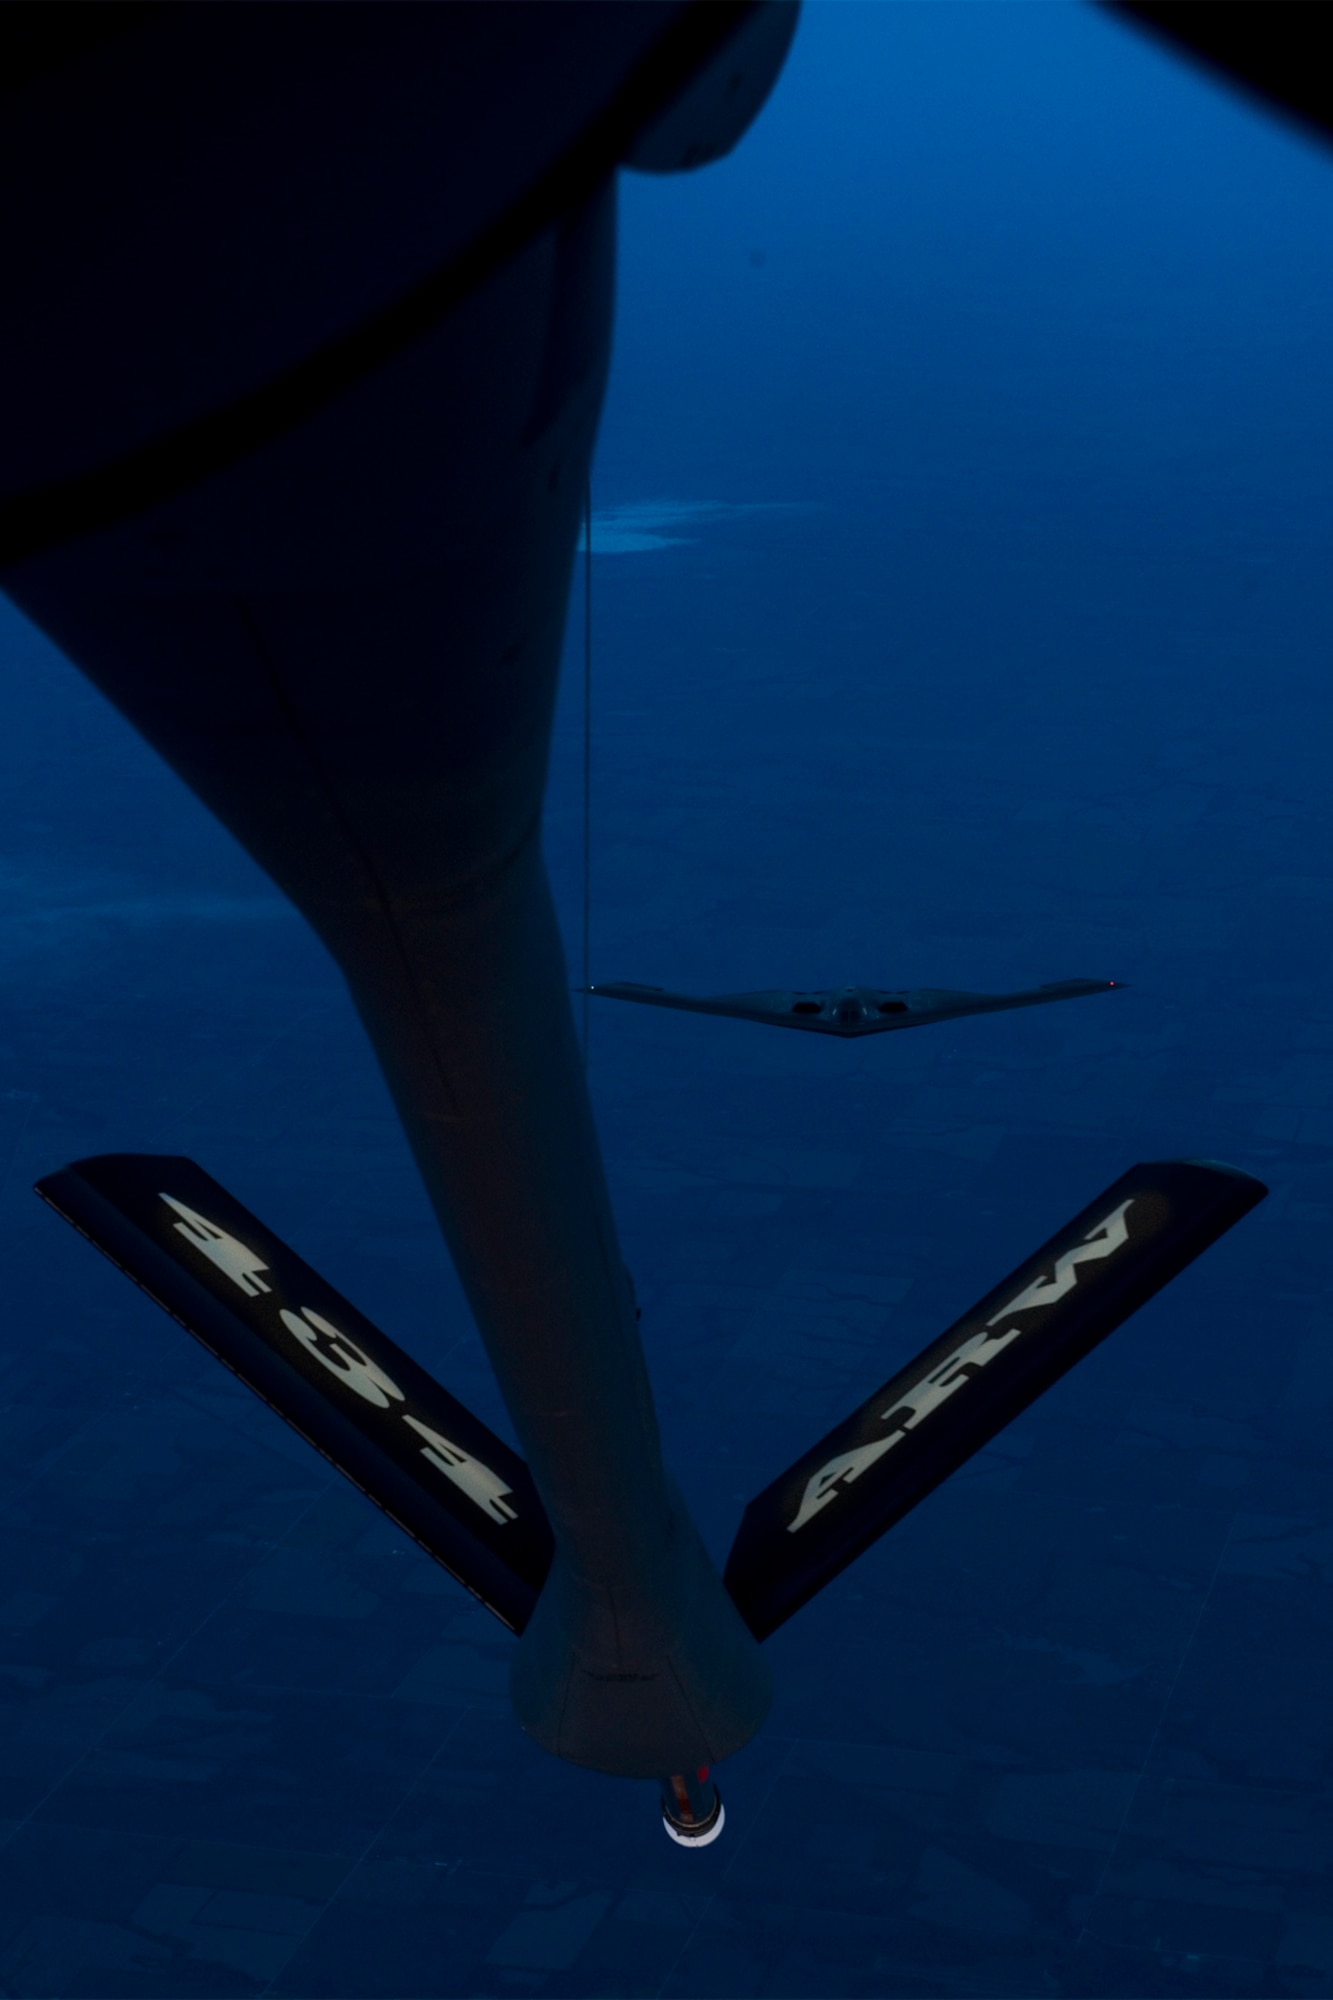 A B-2 Spirit from the 509th Bomb Wing, 13th Bomb Squadron Whiteman Air Force Base, Miss., prepares to be refueled by a KC-135R Stratotanker from the 434th Air Refueling Wing at Grissom Air Reserve Base, Ind. during a night-time aerial refueling mission over Southern Kansas, Oct. 21, 2015. During nighttime refueling, boom operators can use the natural light from the stars and the moon to help refuel the receiver aircraft. (U.S. Air Force photo/Tech. Sgt. Benjamin Mota)